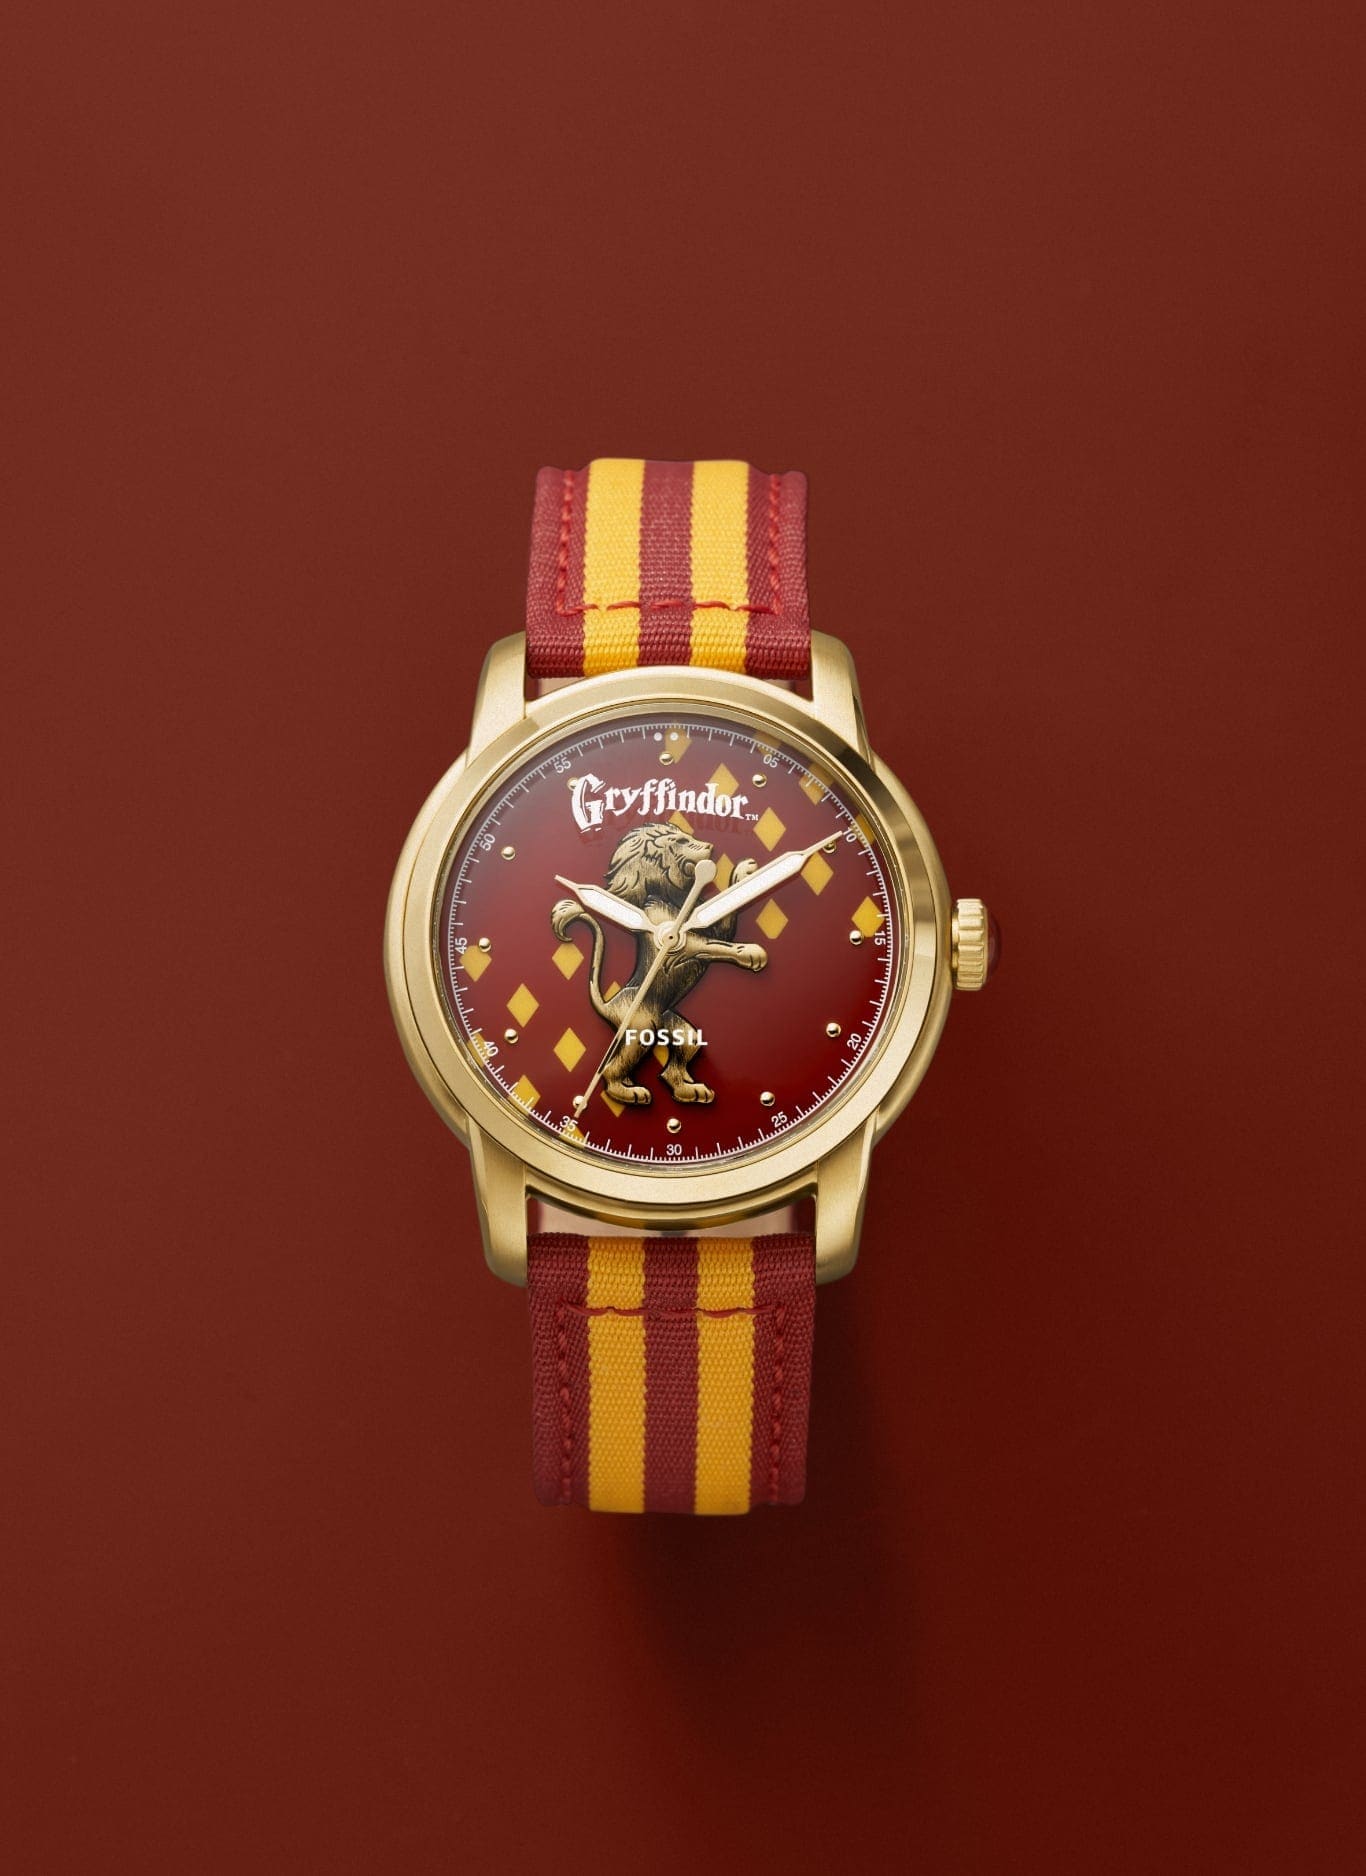 Gold-tone Gryffindor house watch with a red and gold strap.